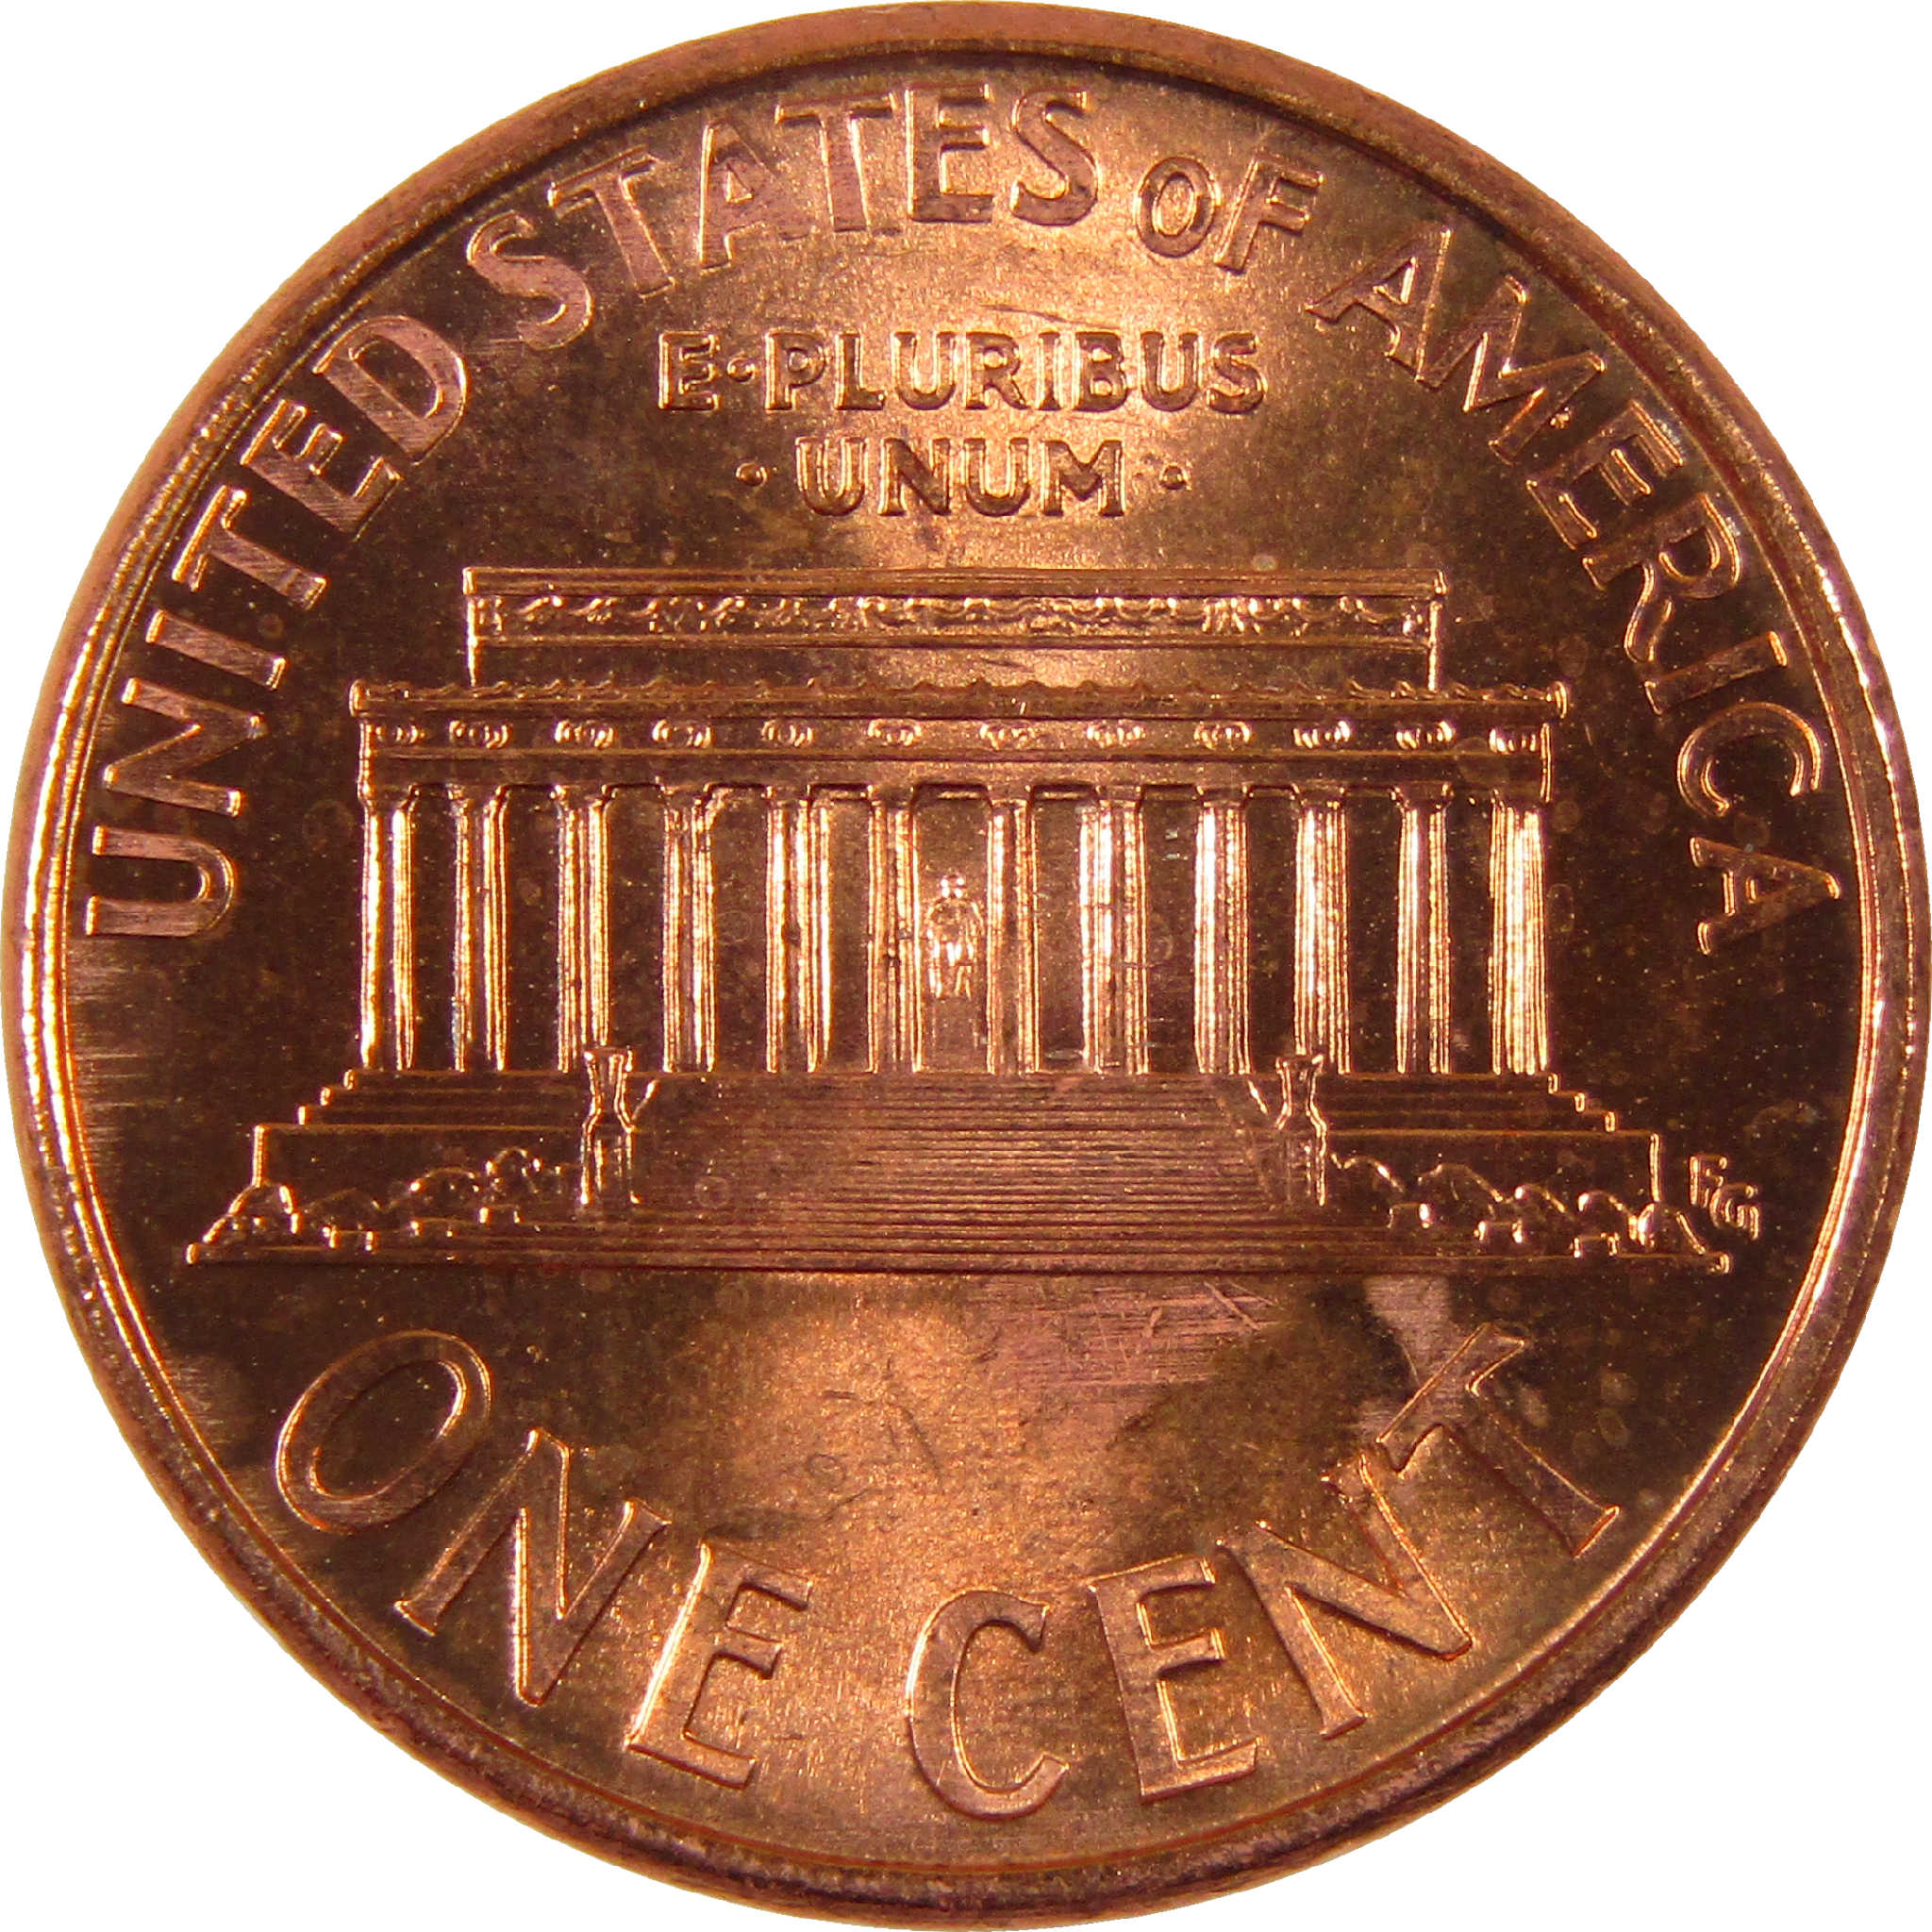 1998 D Lincoln Memorial Cent BU Uncirculated Penny 1c Coin